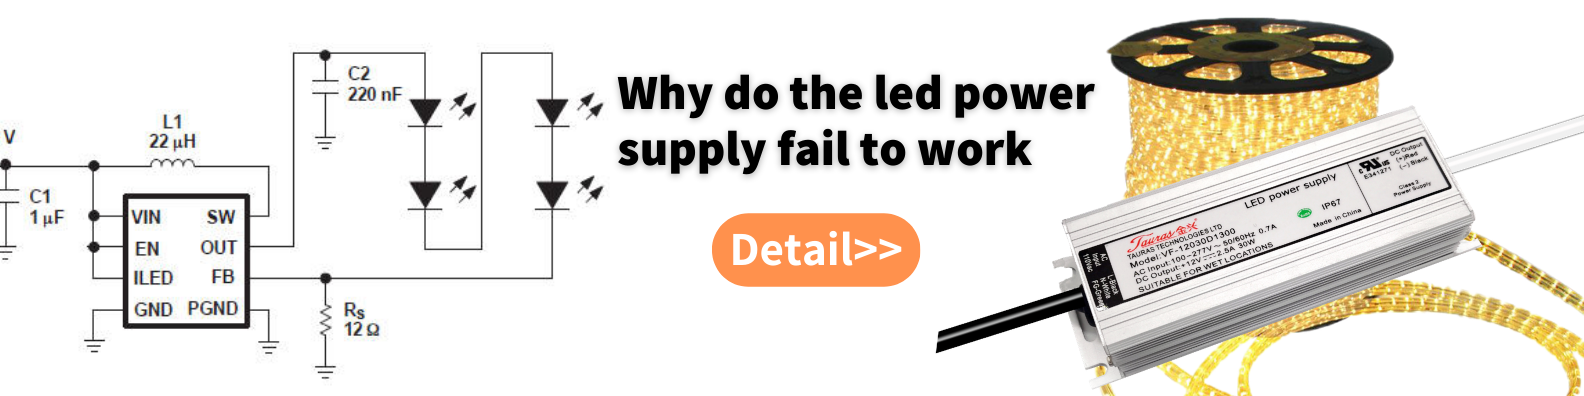 Why do the led power supply fail to work